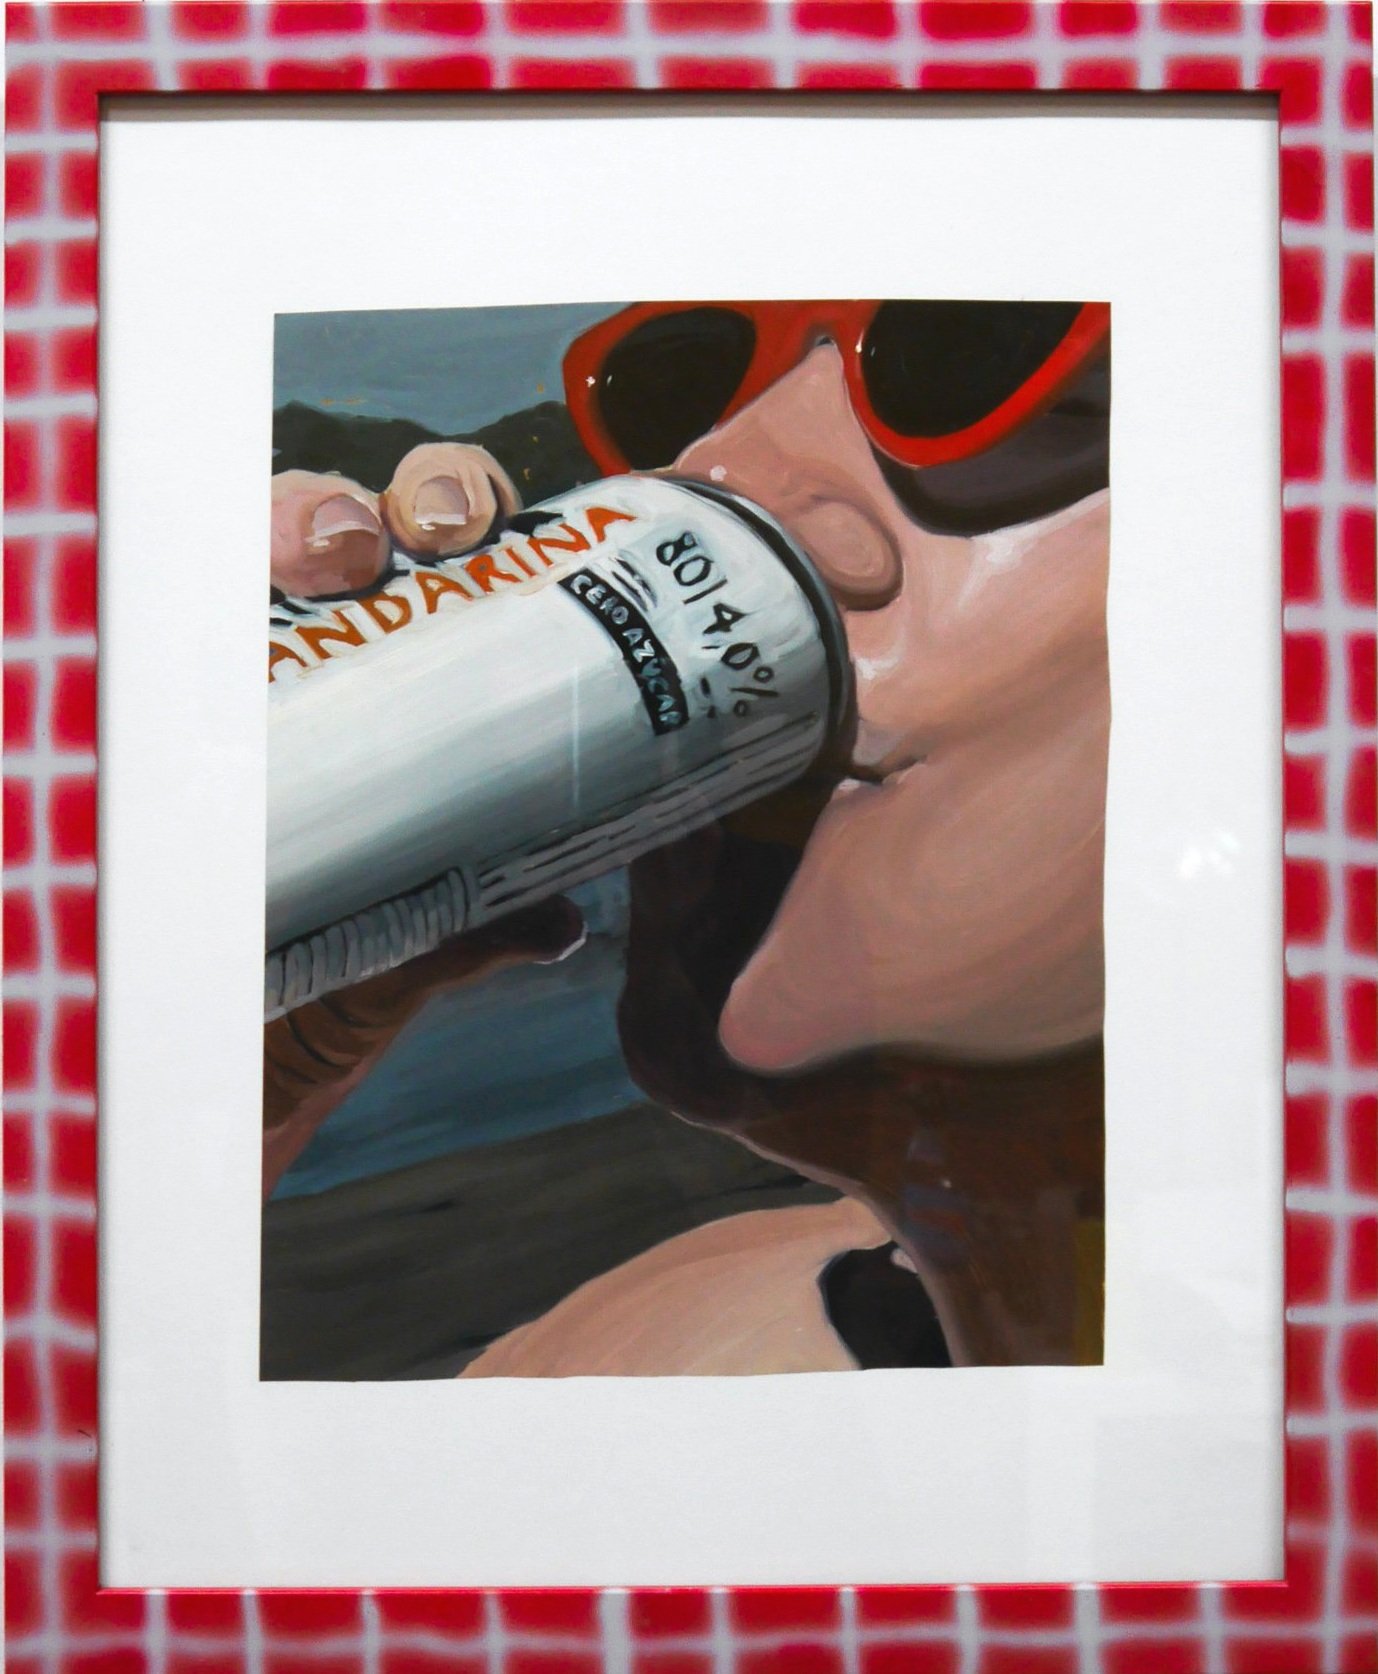  kristin drinking a spanish truly, oil on mylar, 16 x 12 inches (24 x 18 inches framed), 2020-22 